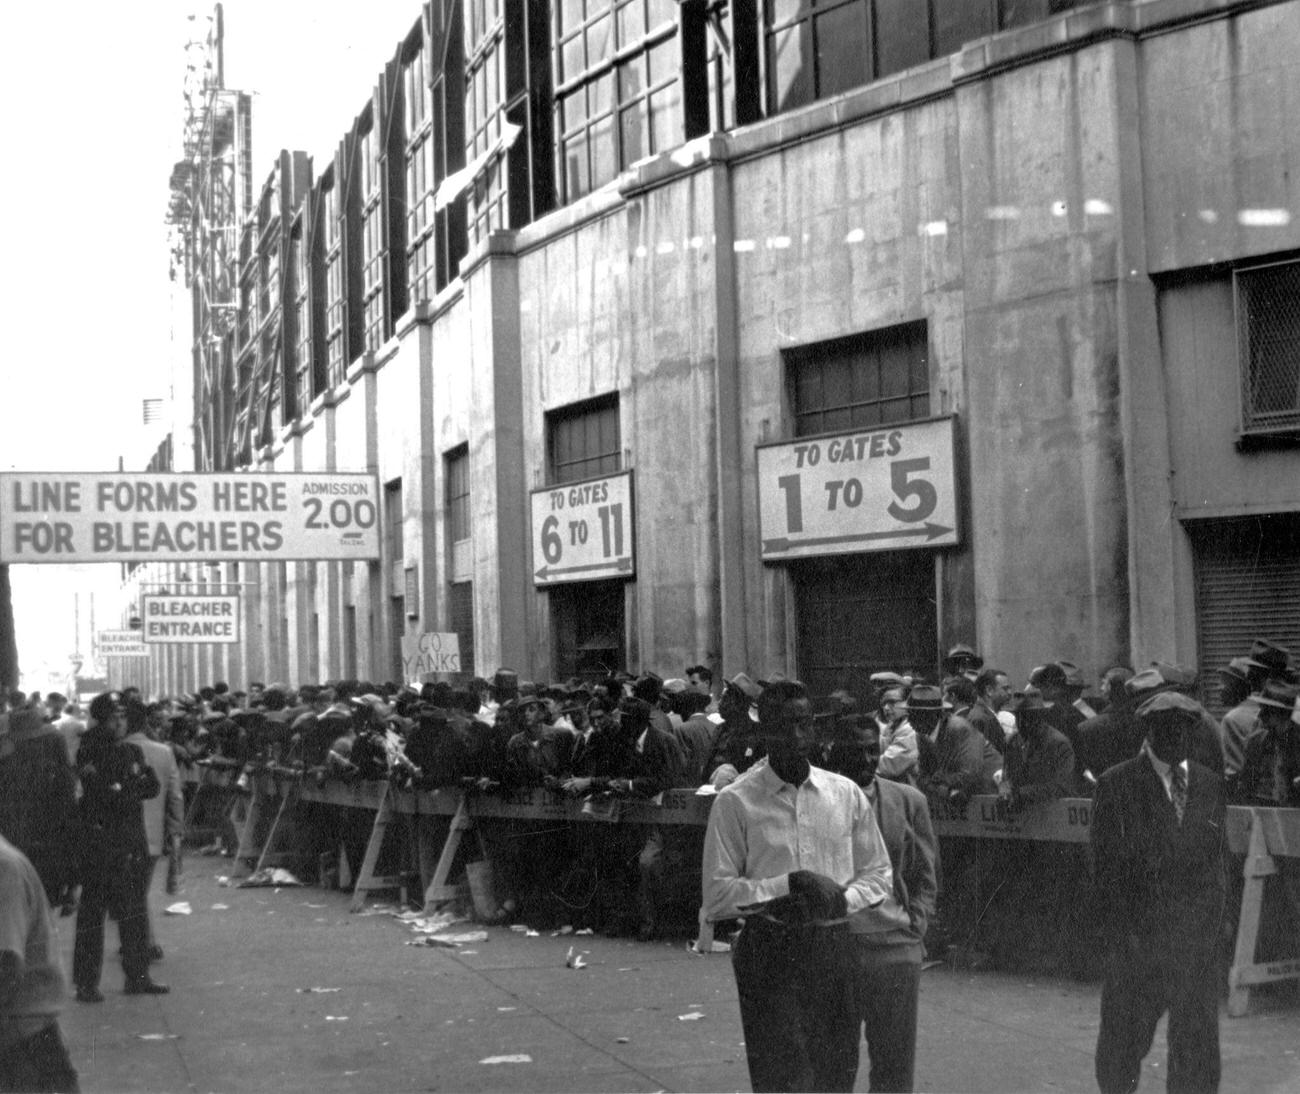 Fans Lined Up For World Series Tickets At Ebbets Field, Brooklyn, 1949